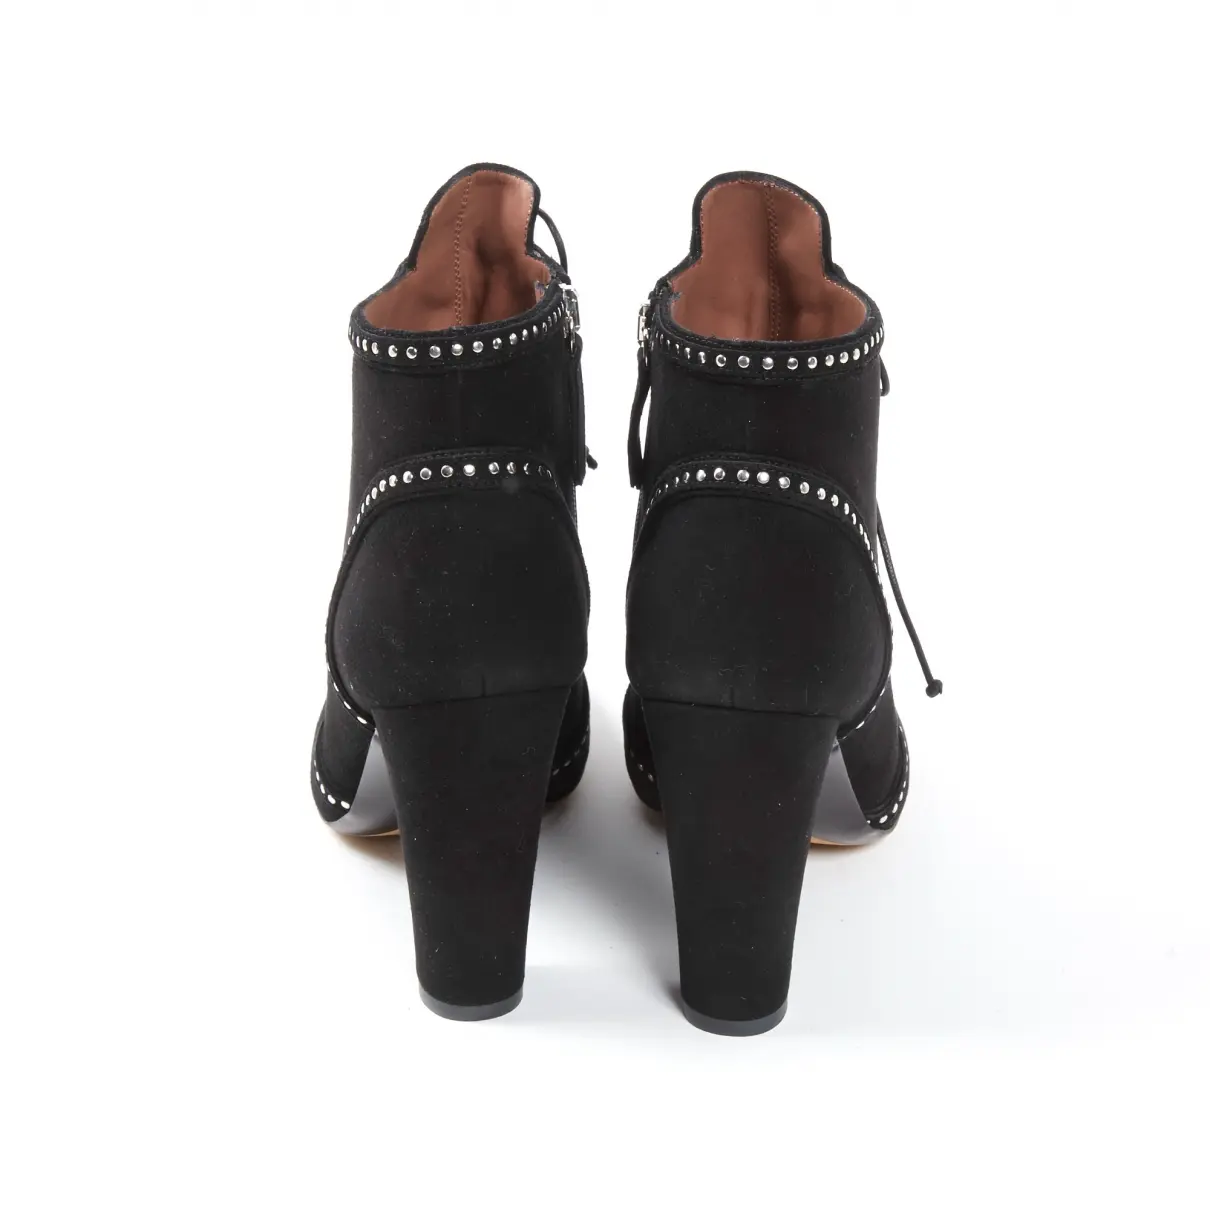 Luxury Tabitha Simmons Ankle boots Women